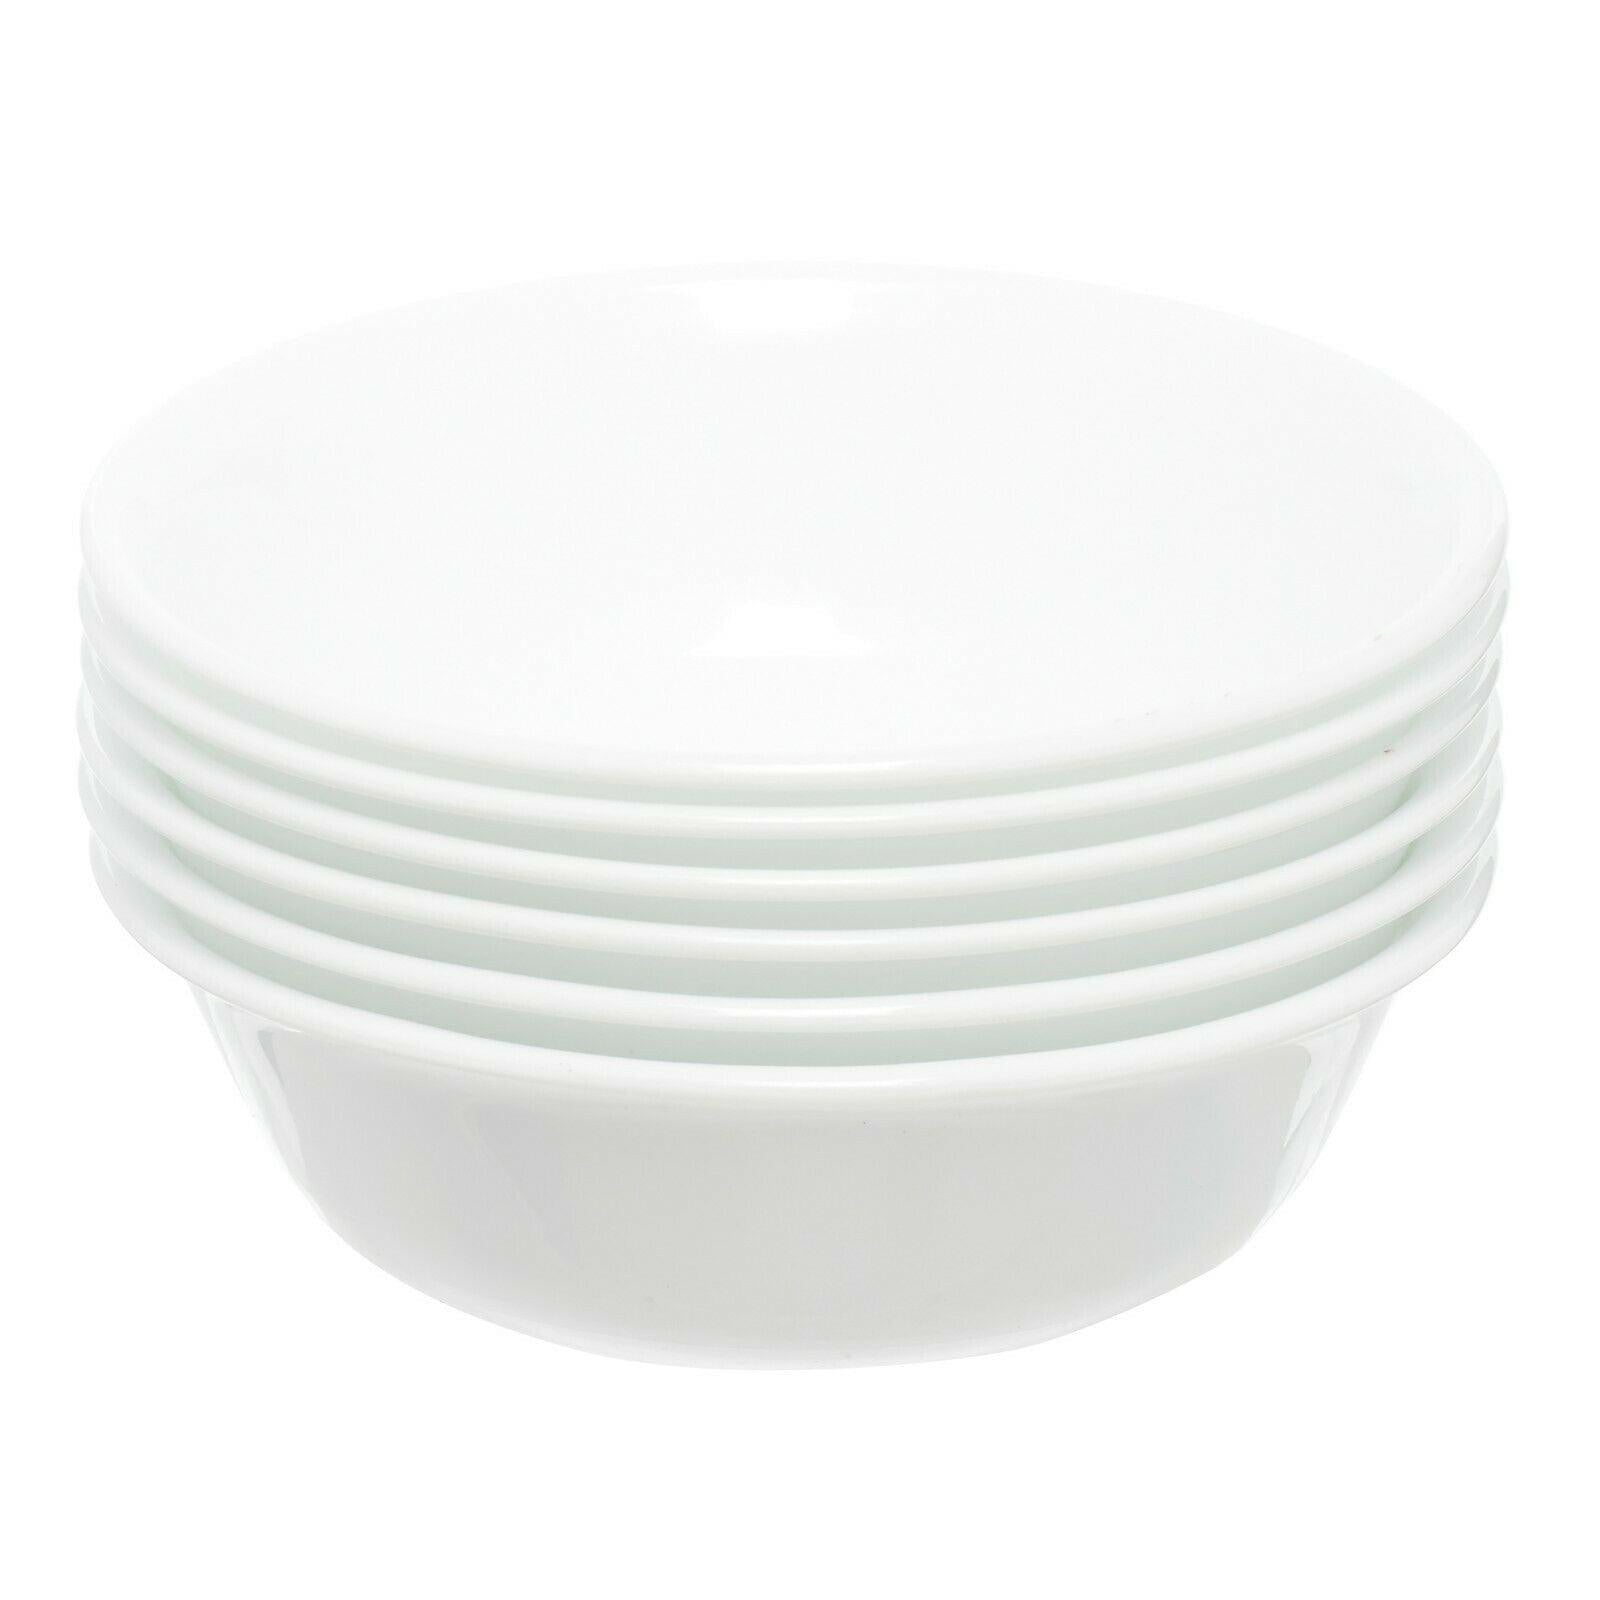 Corelle Classic Winter Frost White 18-oz Soup Bowl, Set of 6 - Etyn Online {{ product_tag }}